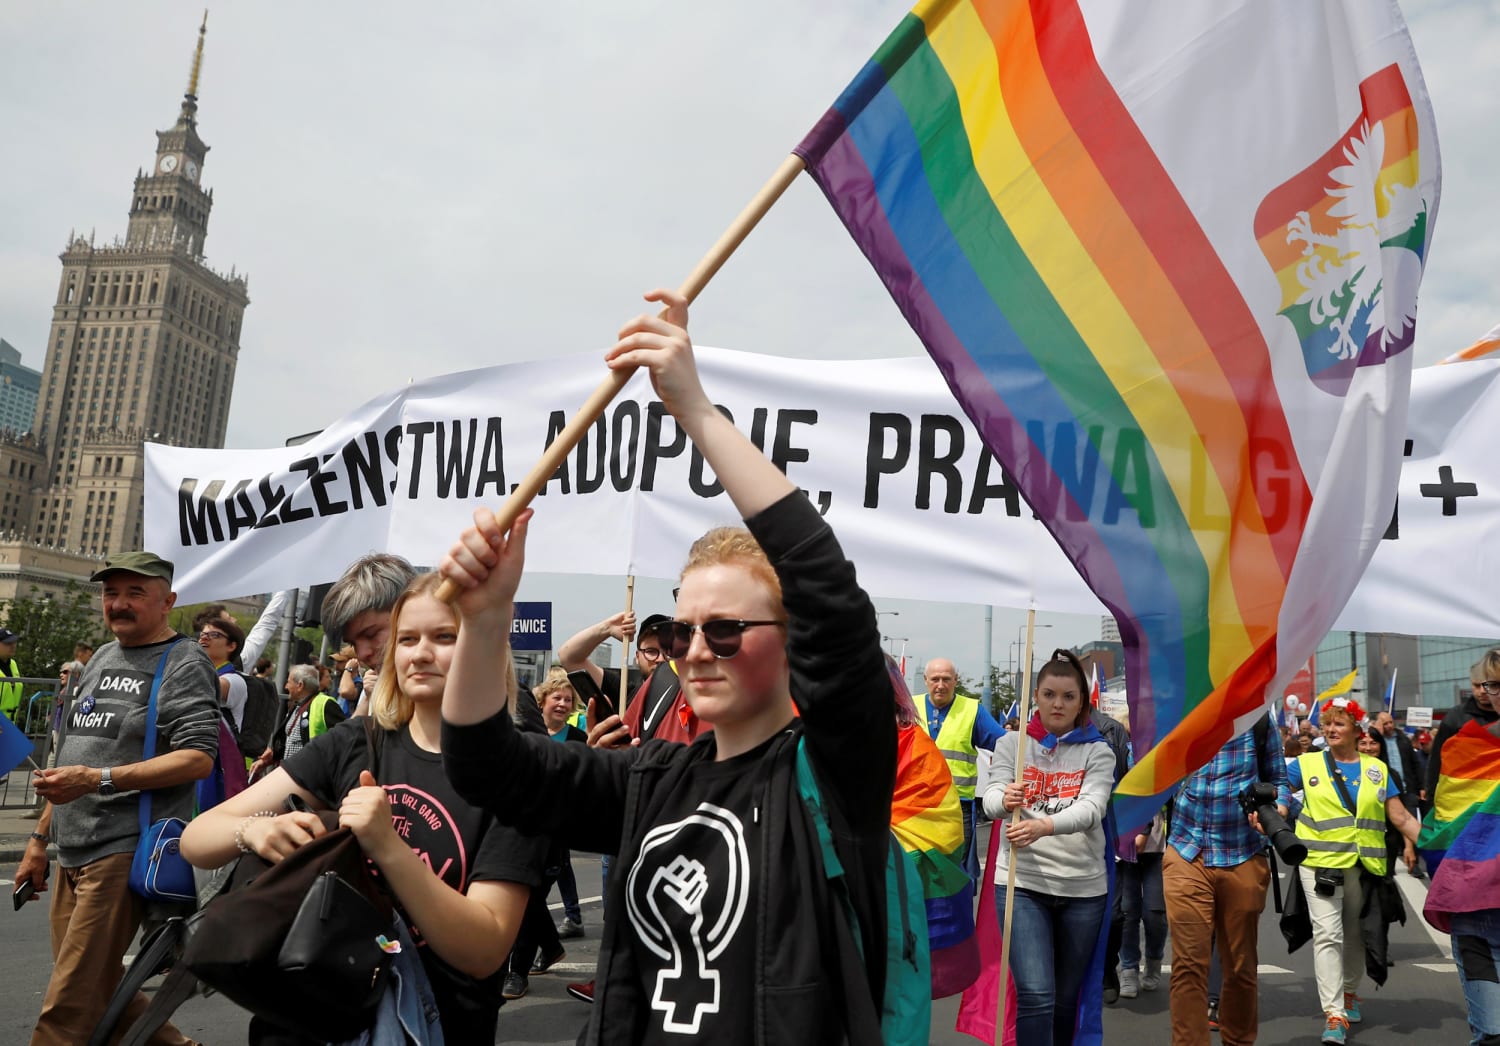 Polish towns go 'LGBT free' ahead of bitter European election campaign